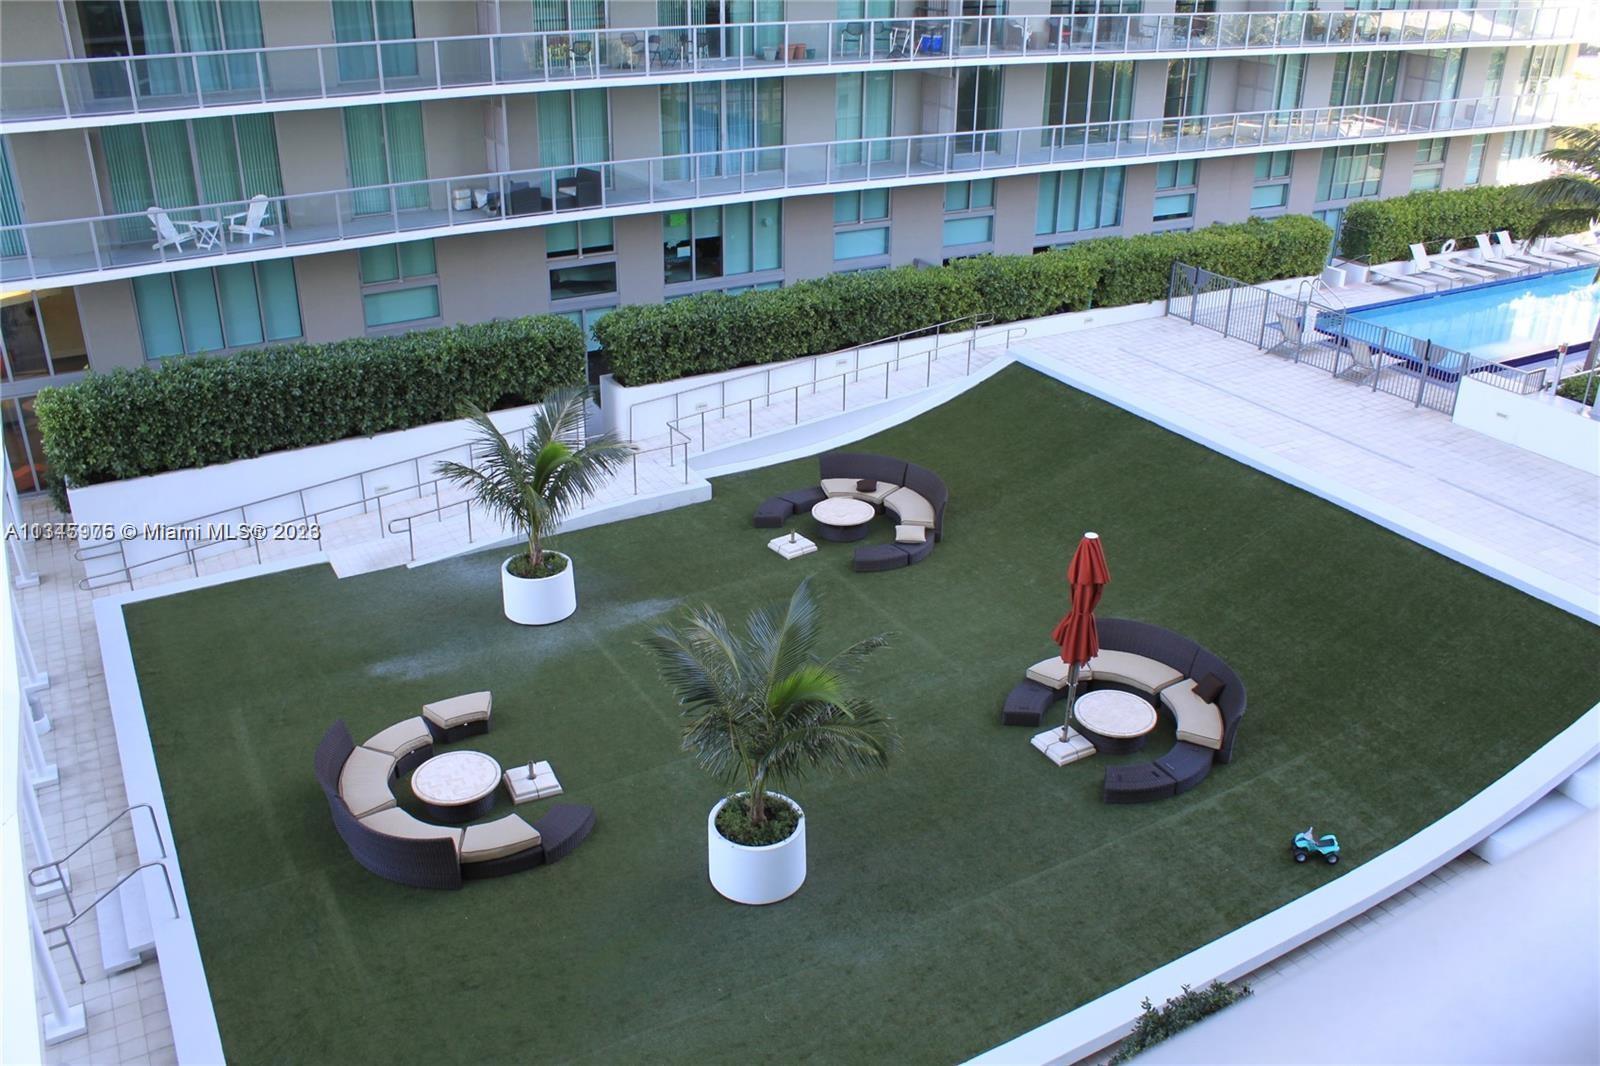 Photo 13 of Axis S Apt 1209-S in Miami - MLS A11345975